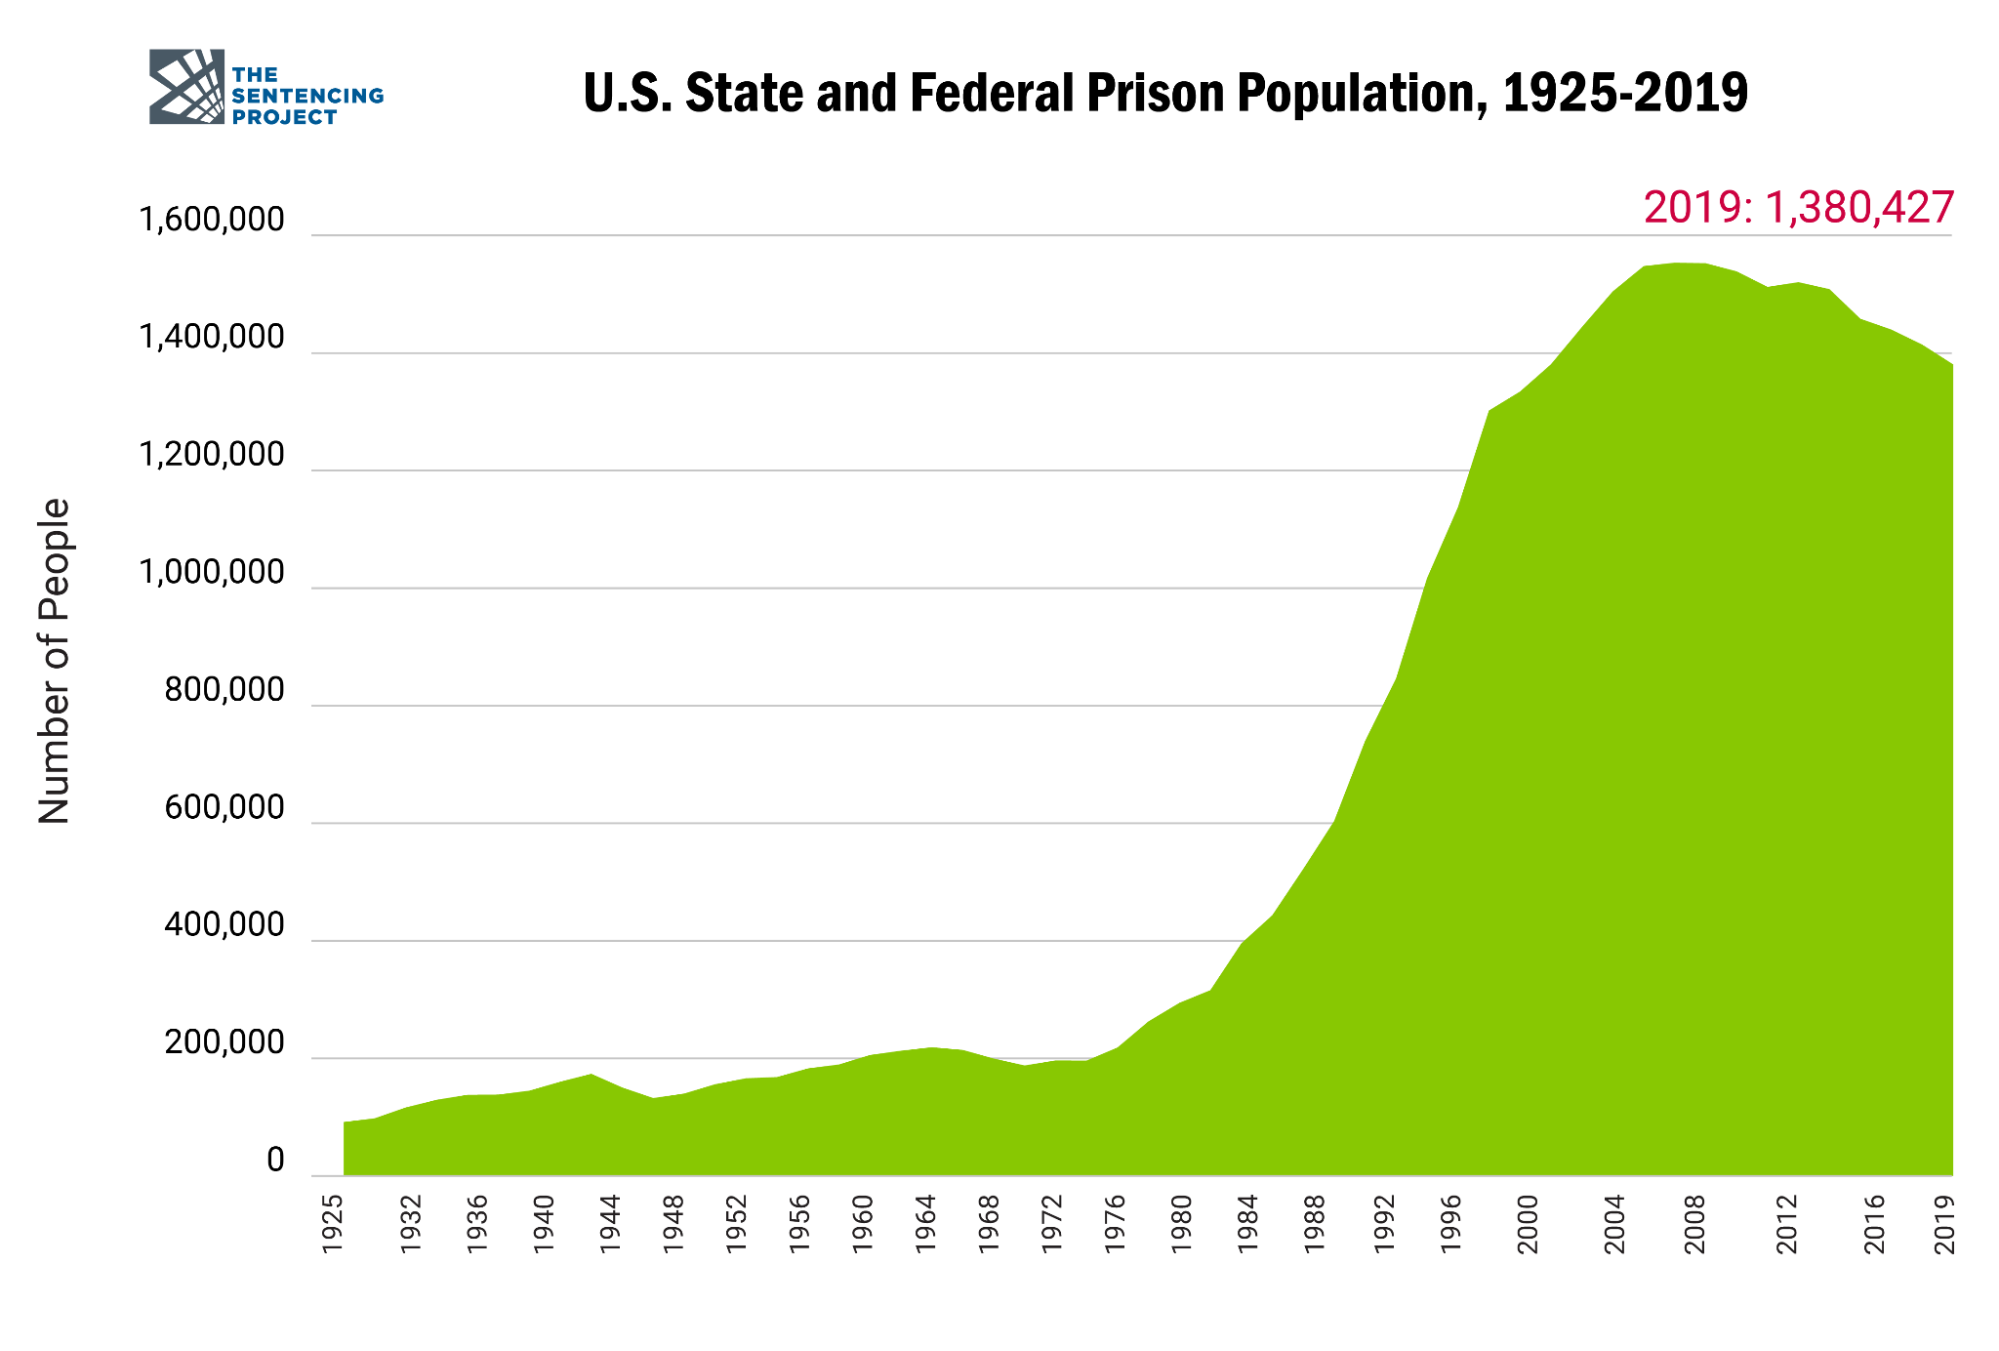 A graph showing U.S. State and Federal Prison Populations exponential growth from 1925 to 2019.